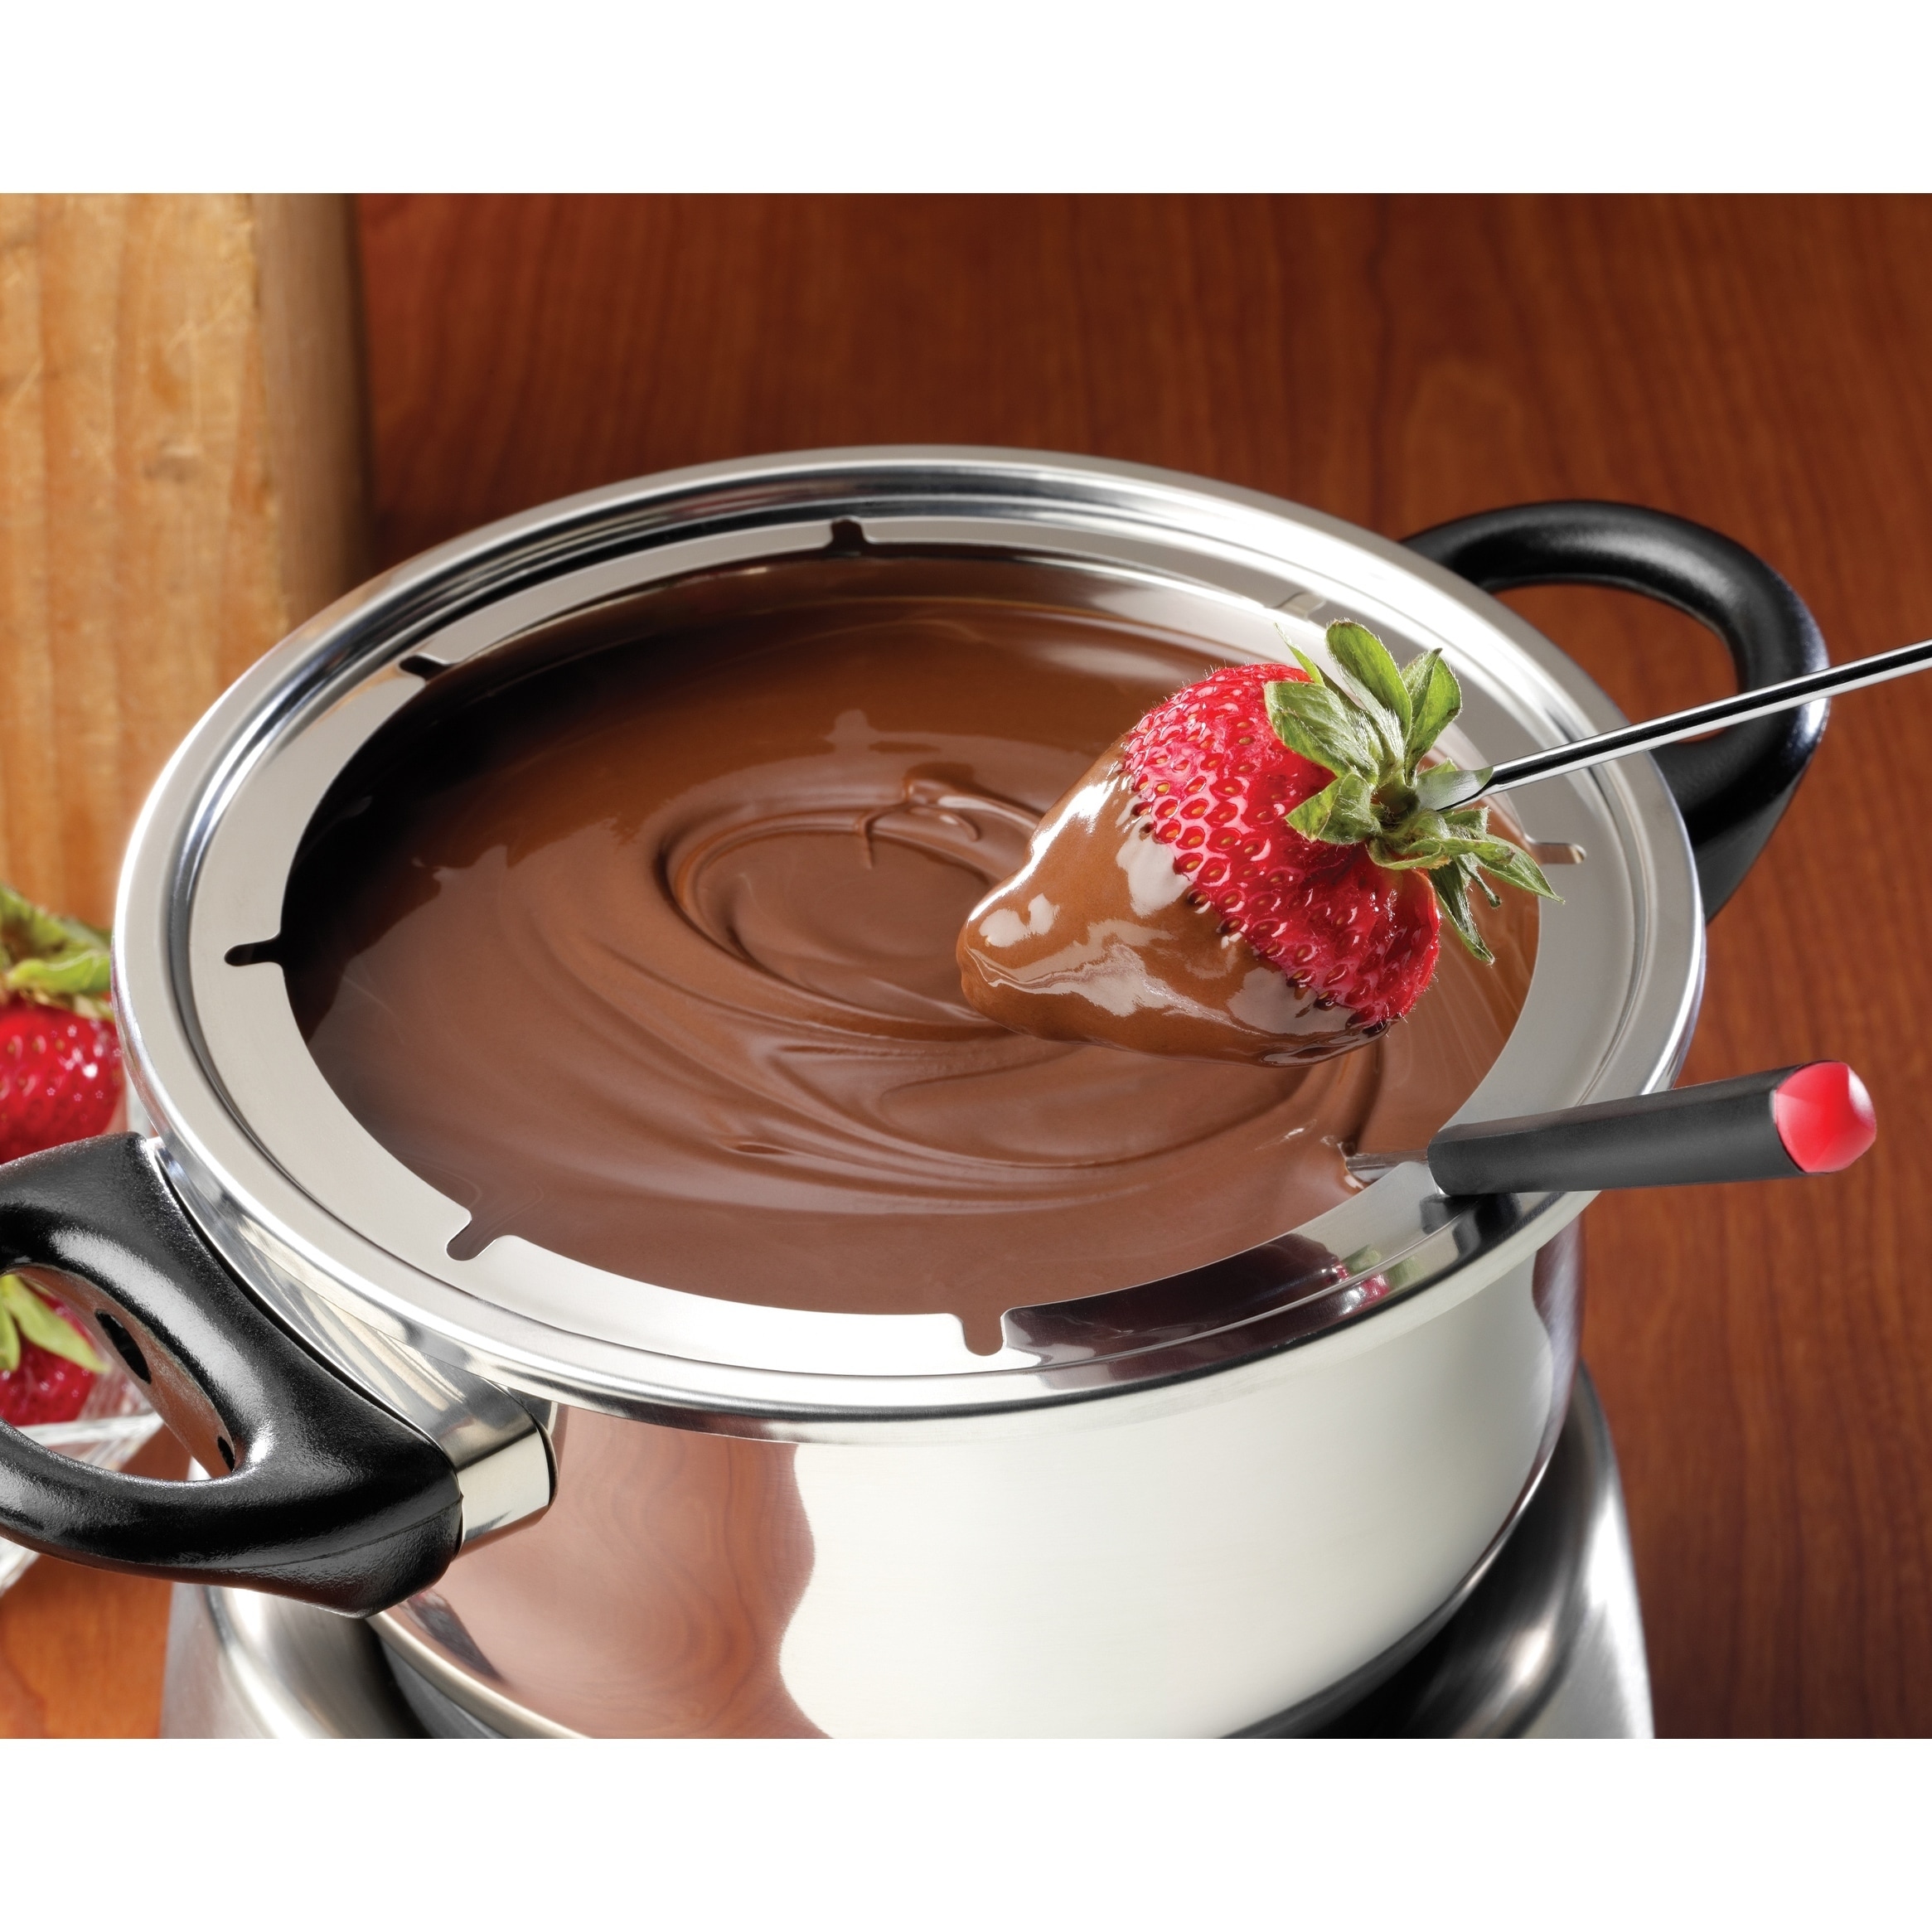 https://ak1.ostkcdn.com/images/products/6277393/Nostalgia-FPS200-6-Cup-Stainless-Steel-Electric-Fondue-Pot-53c1df50-4eb6-4f94-bb80-d450e6d5a341.jpg